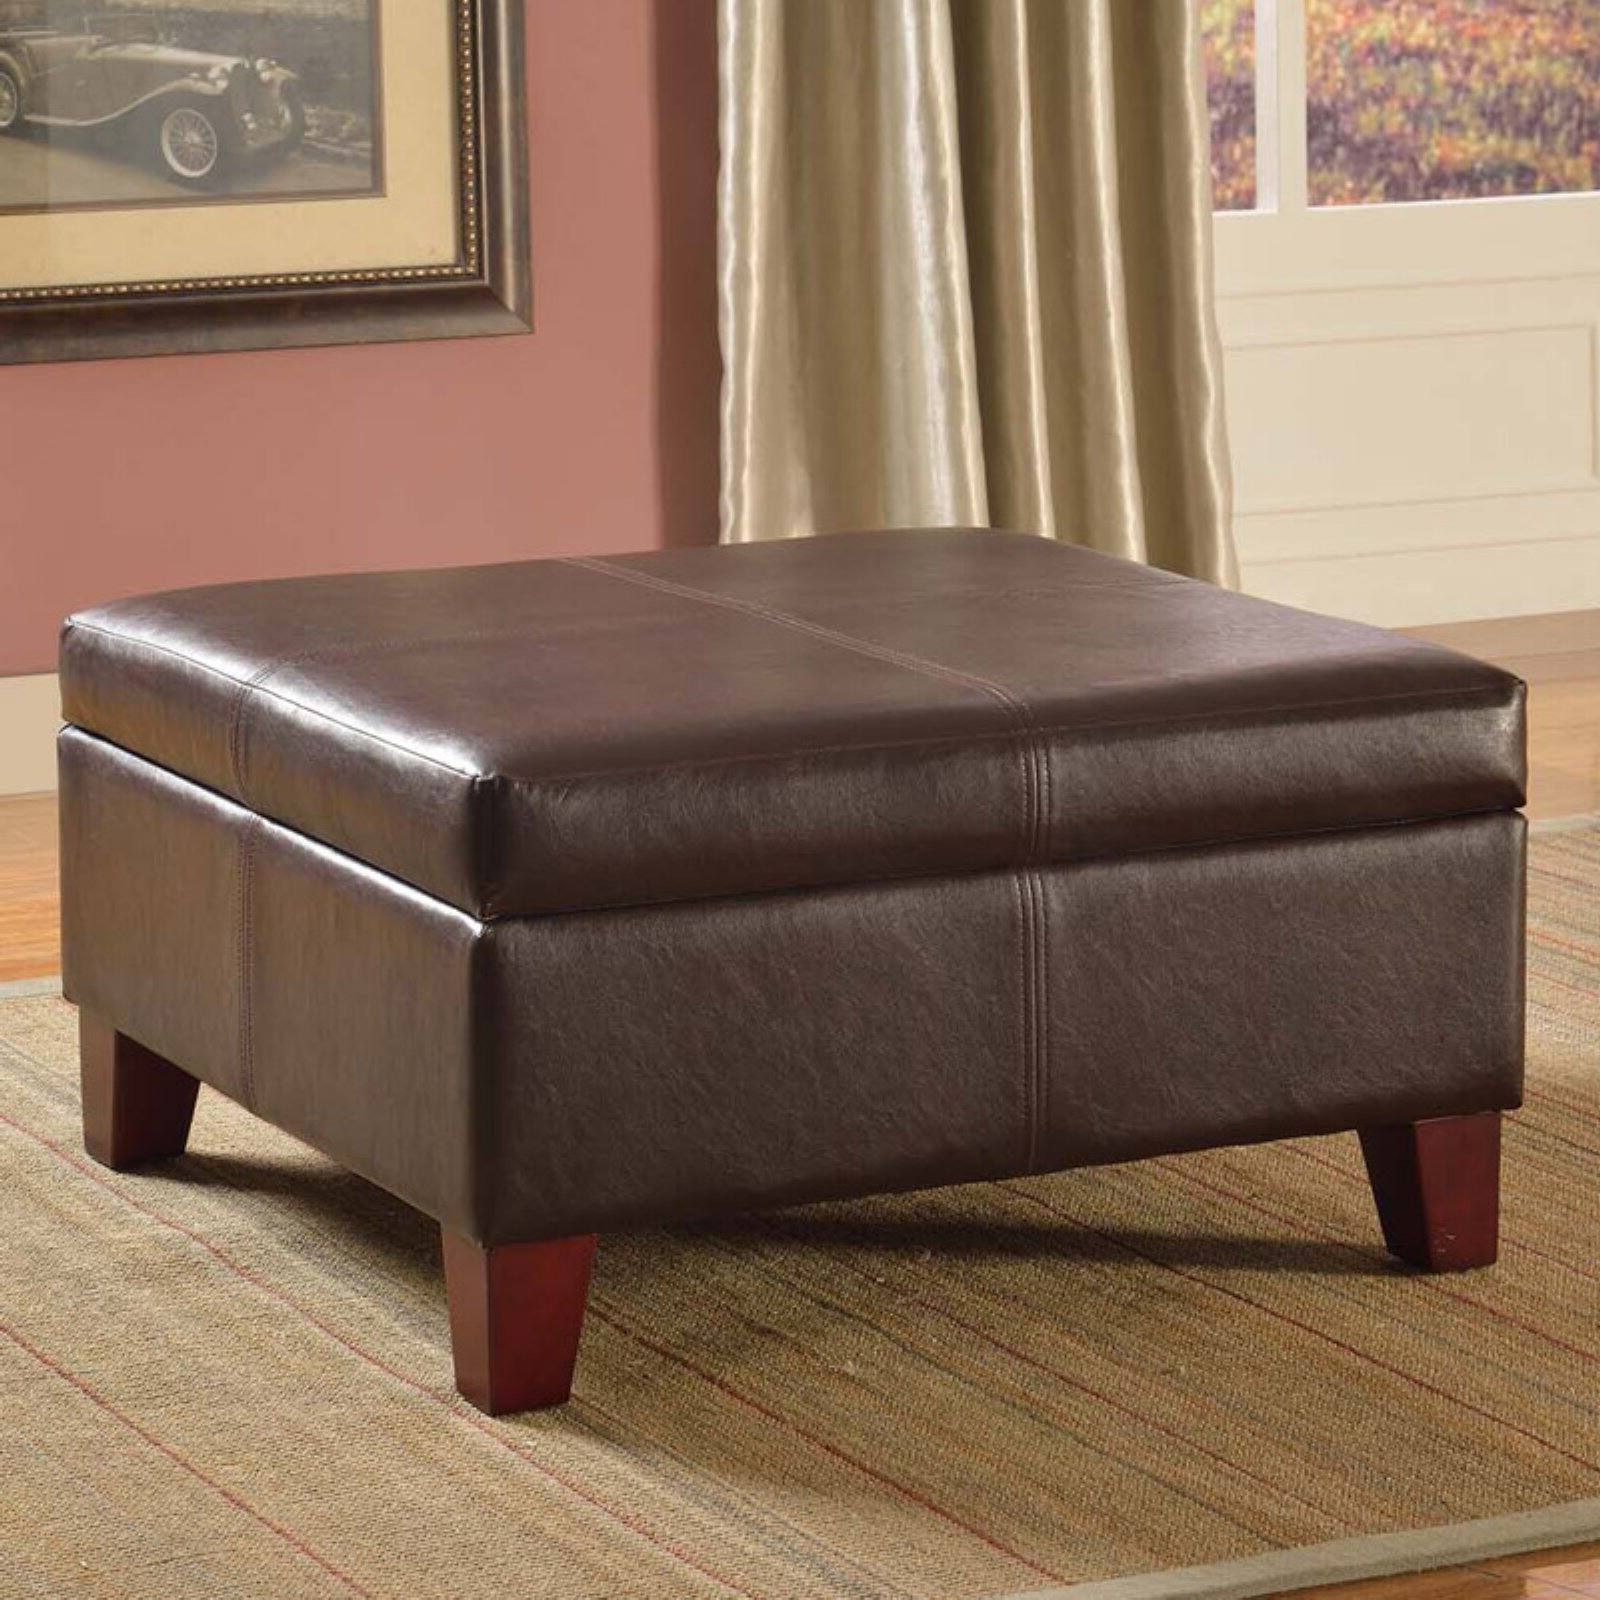 Popular Kinfine Usa Luxury Large Faux Leather Storage Ottoman – Walmart In Fabric Oversized Pouf Ottomans (View 1 of 10)